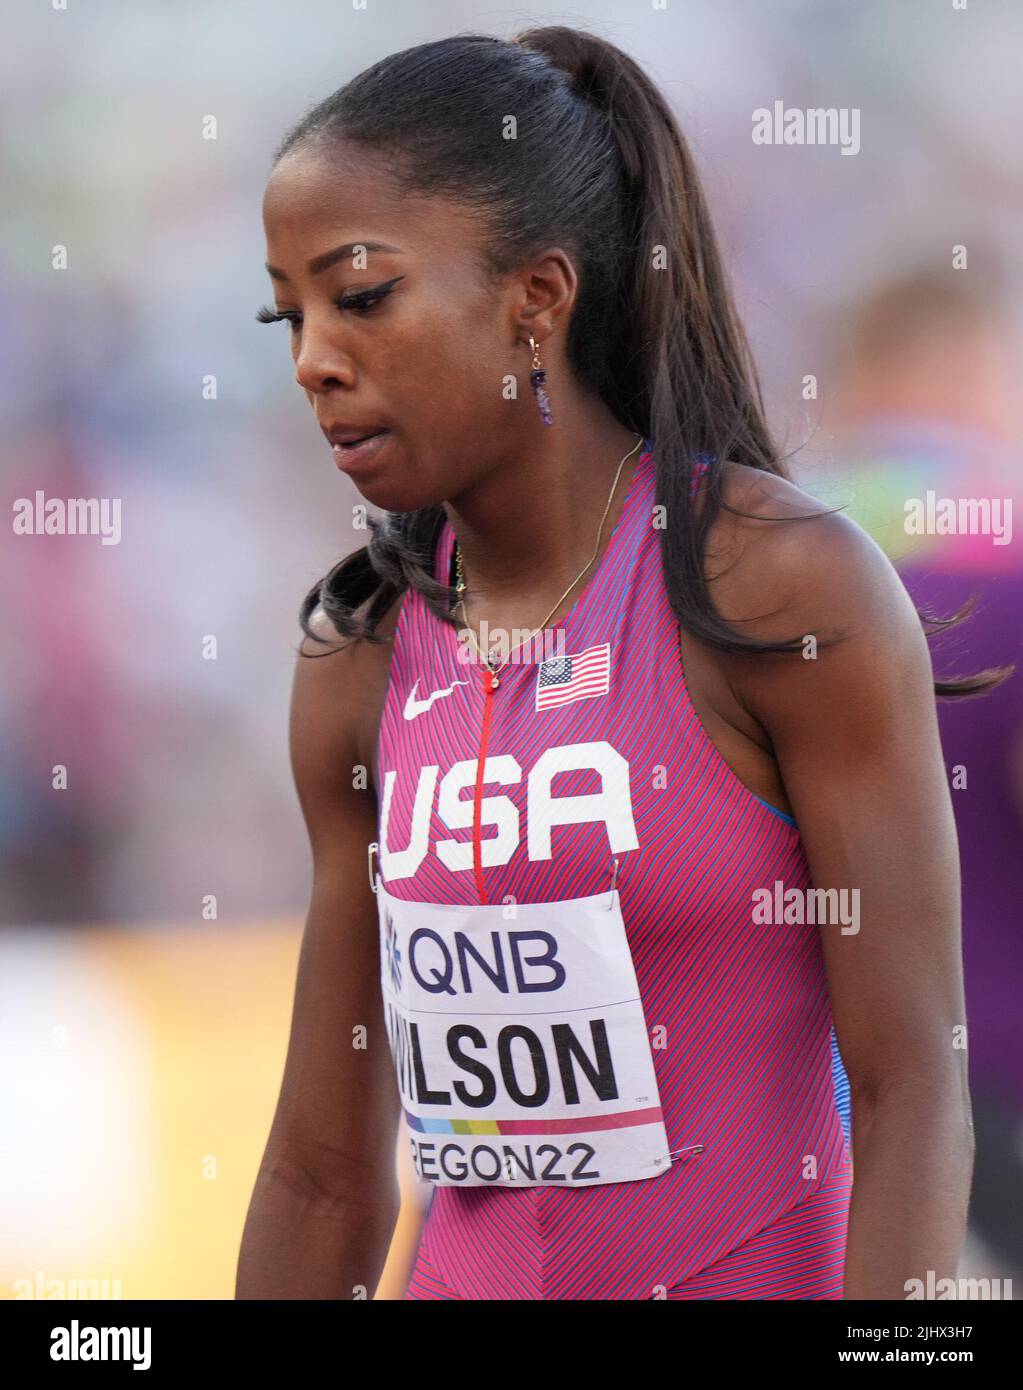 Eugene, USA. 20th July, 2022. Britton Wilson of the United States reacts after the women's 400m hurdles semifinal at the World Athletics Championships Oregon22 in Eugene, Oregon, the United States, July 20, 2022. Credit: Wang Ying/Xinhua/Alamy Live News Stock Photo